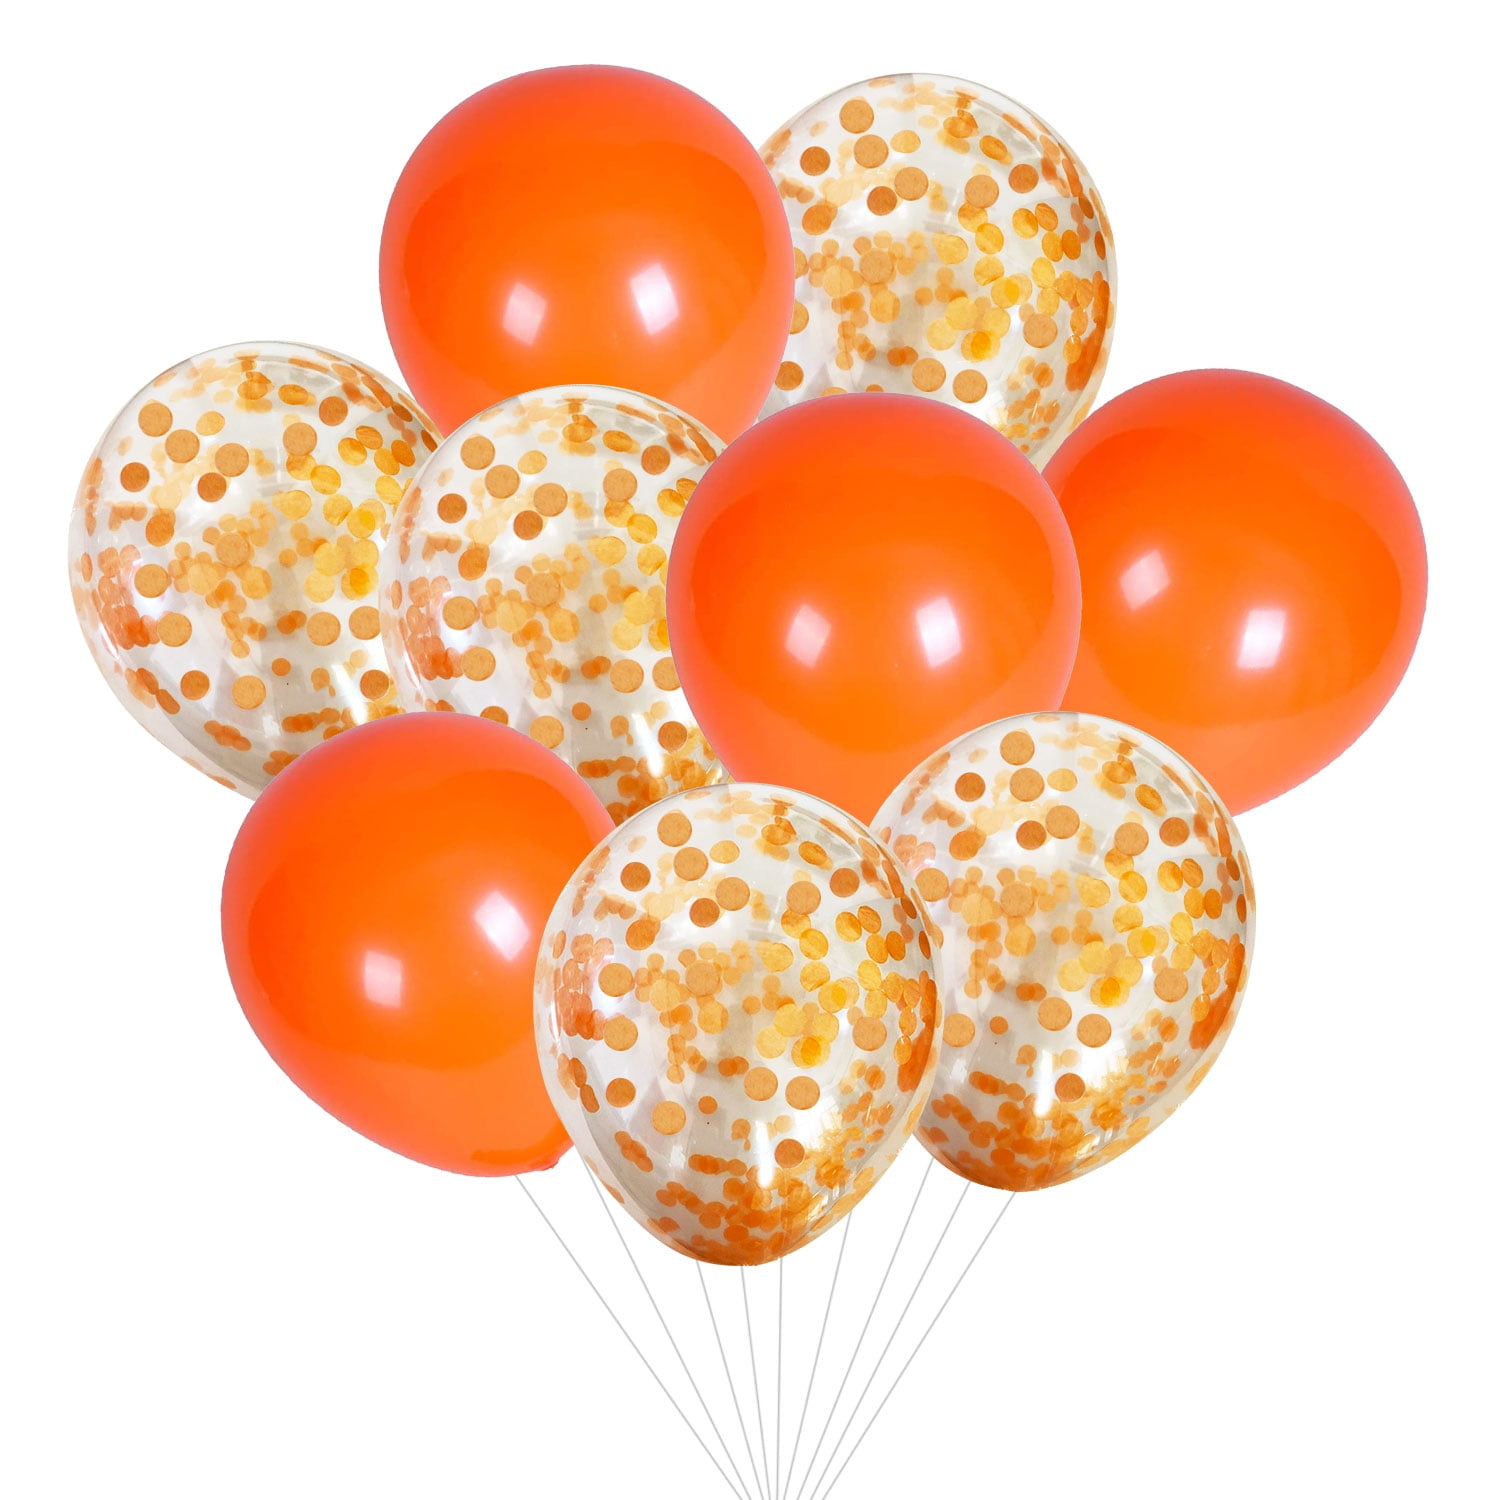 Balloon weight bw-1 ORANGE – A. L. Party Balloons